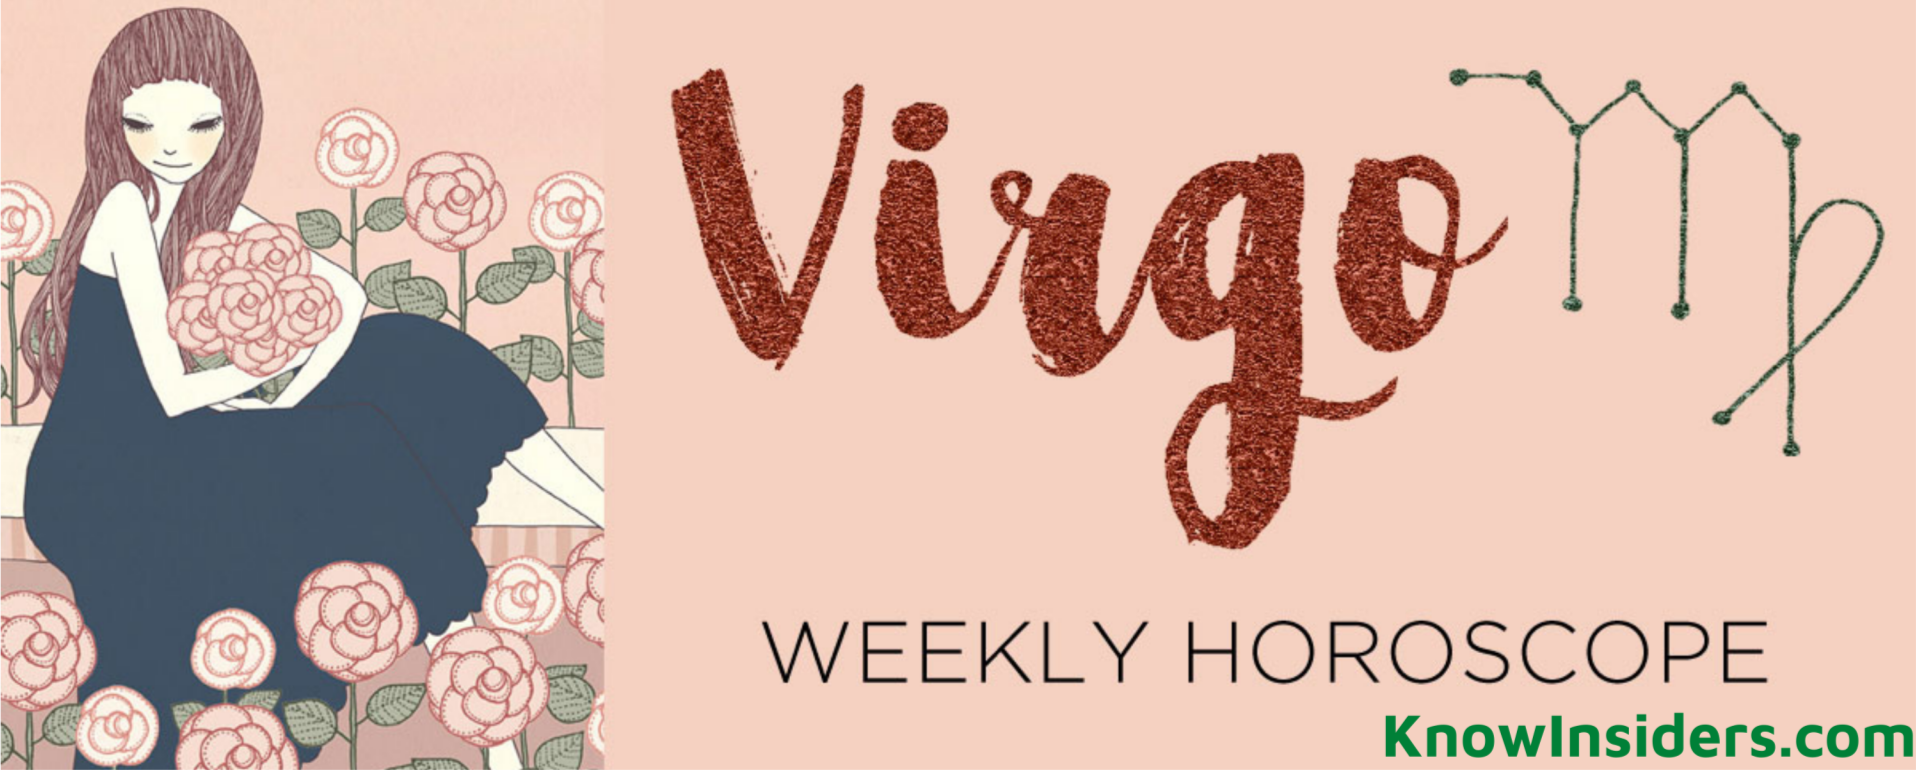 VIRGO Weekly Horoscope (April 12 - 18): Astrological Predictions for Love, Financial, Career and Health